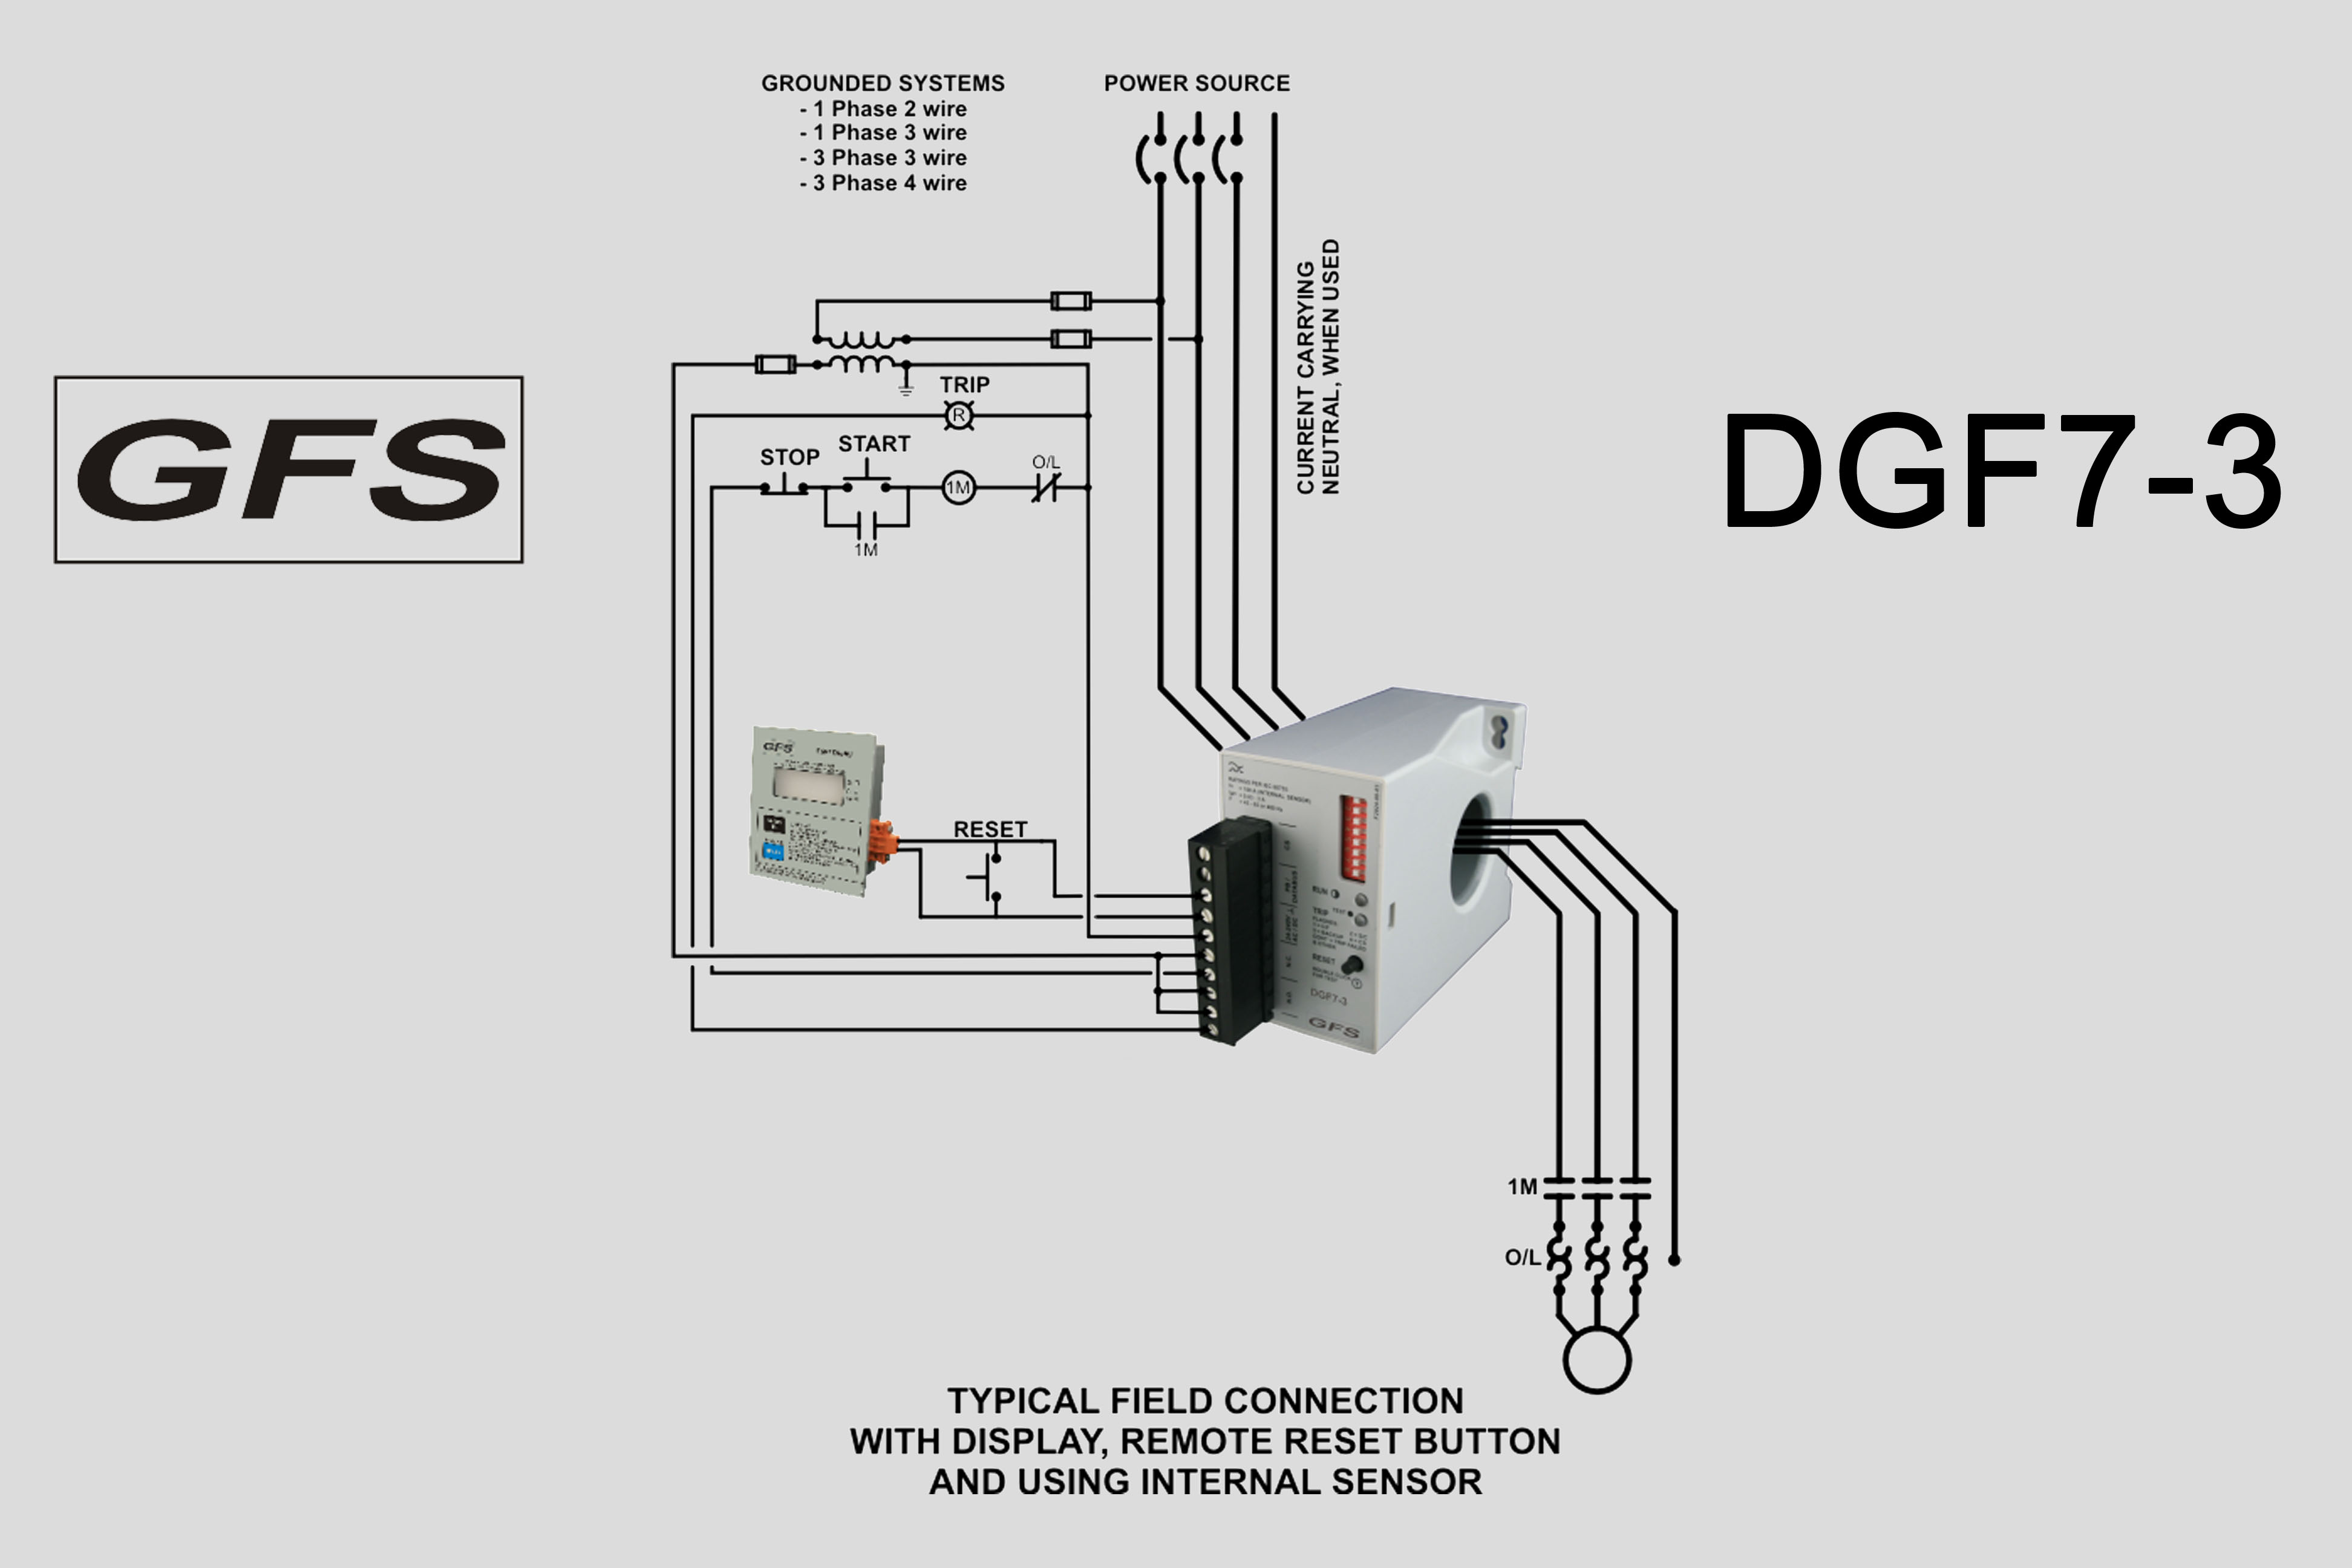 Ground Fault Relay DGF7-3 typical field connection using internal sensor